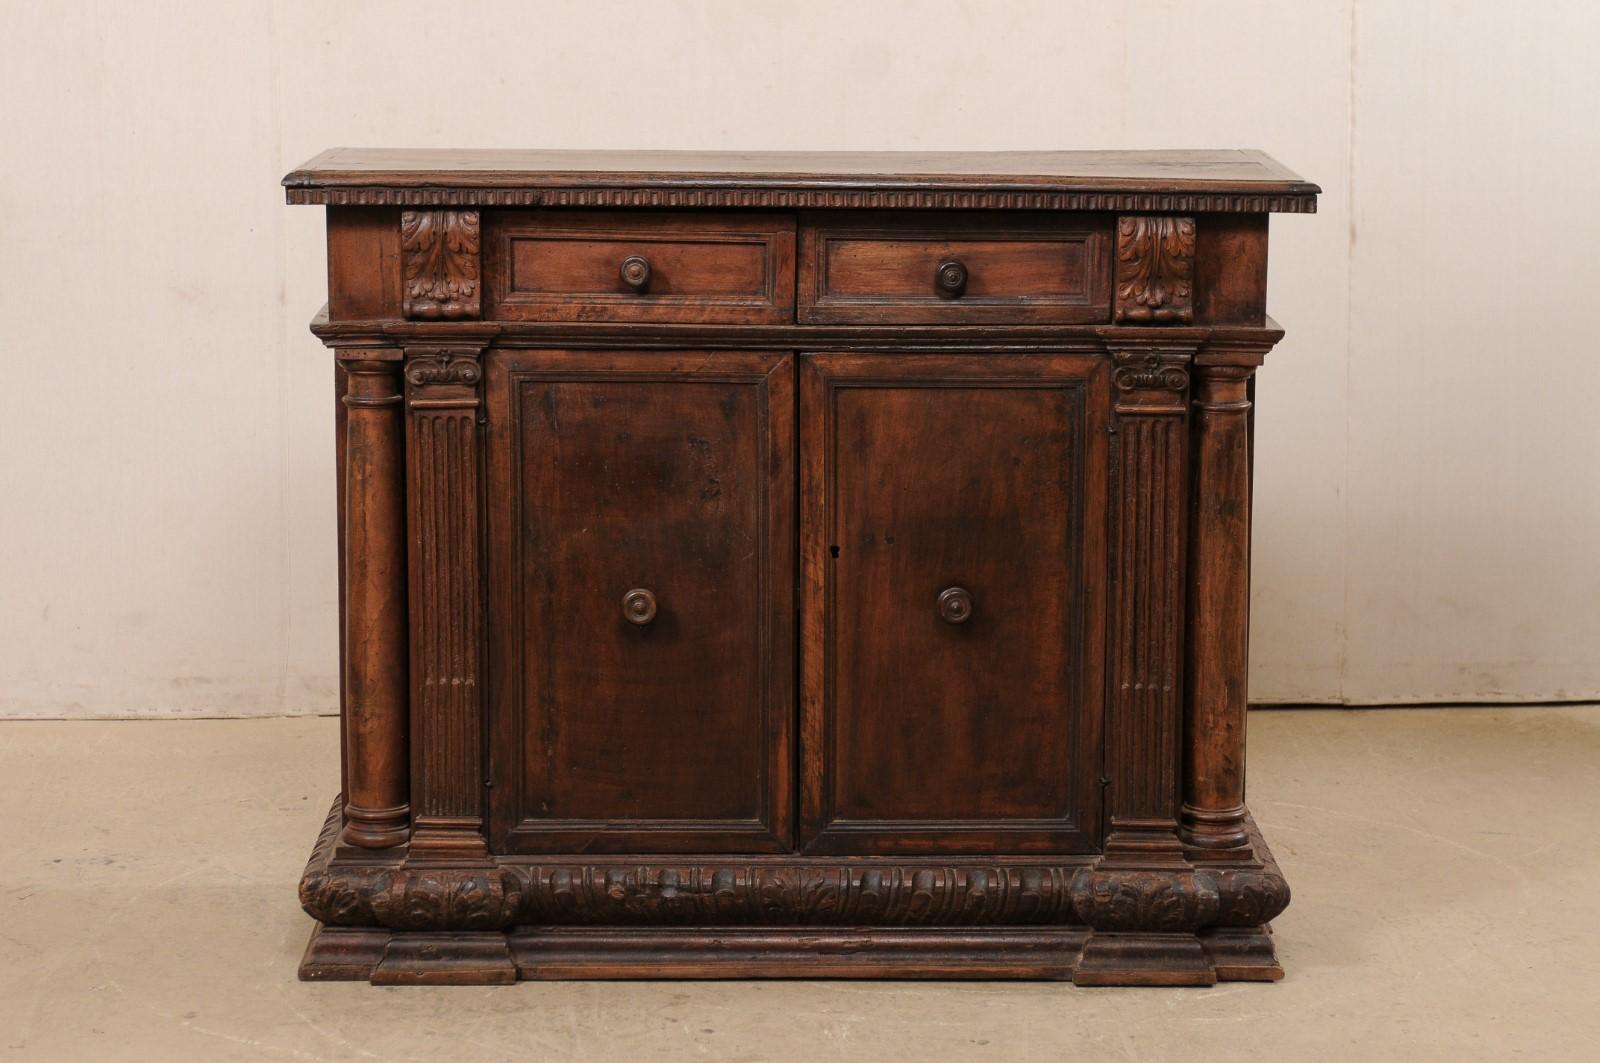 Italian Early 19th C. Walnut Cabinet with Carved Column & Pilaster Accents For Sale 7